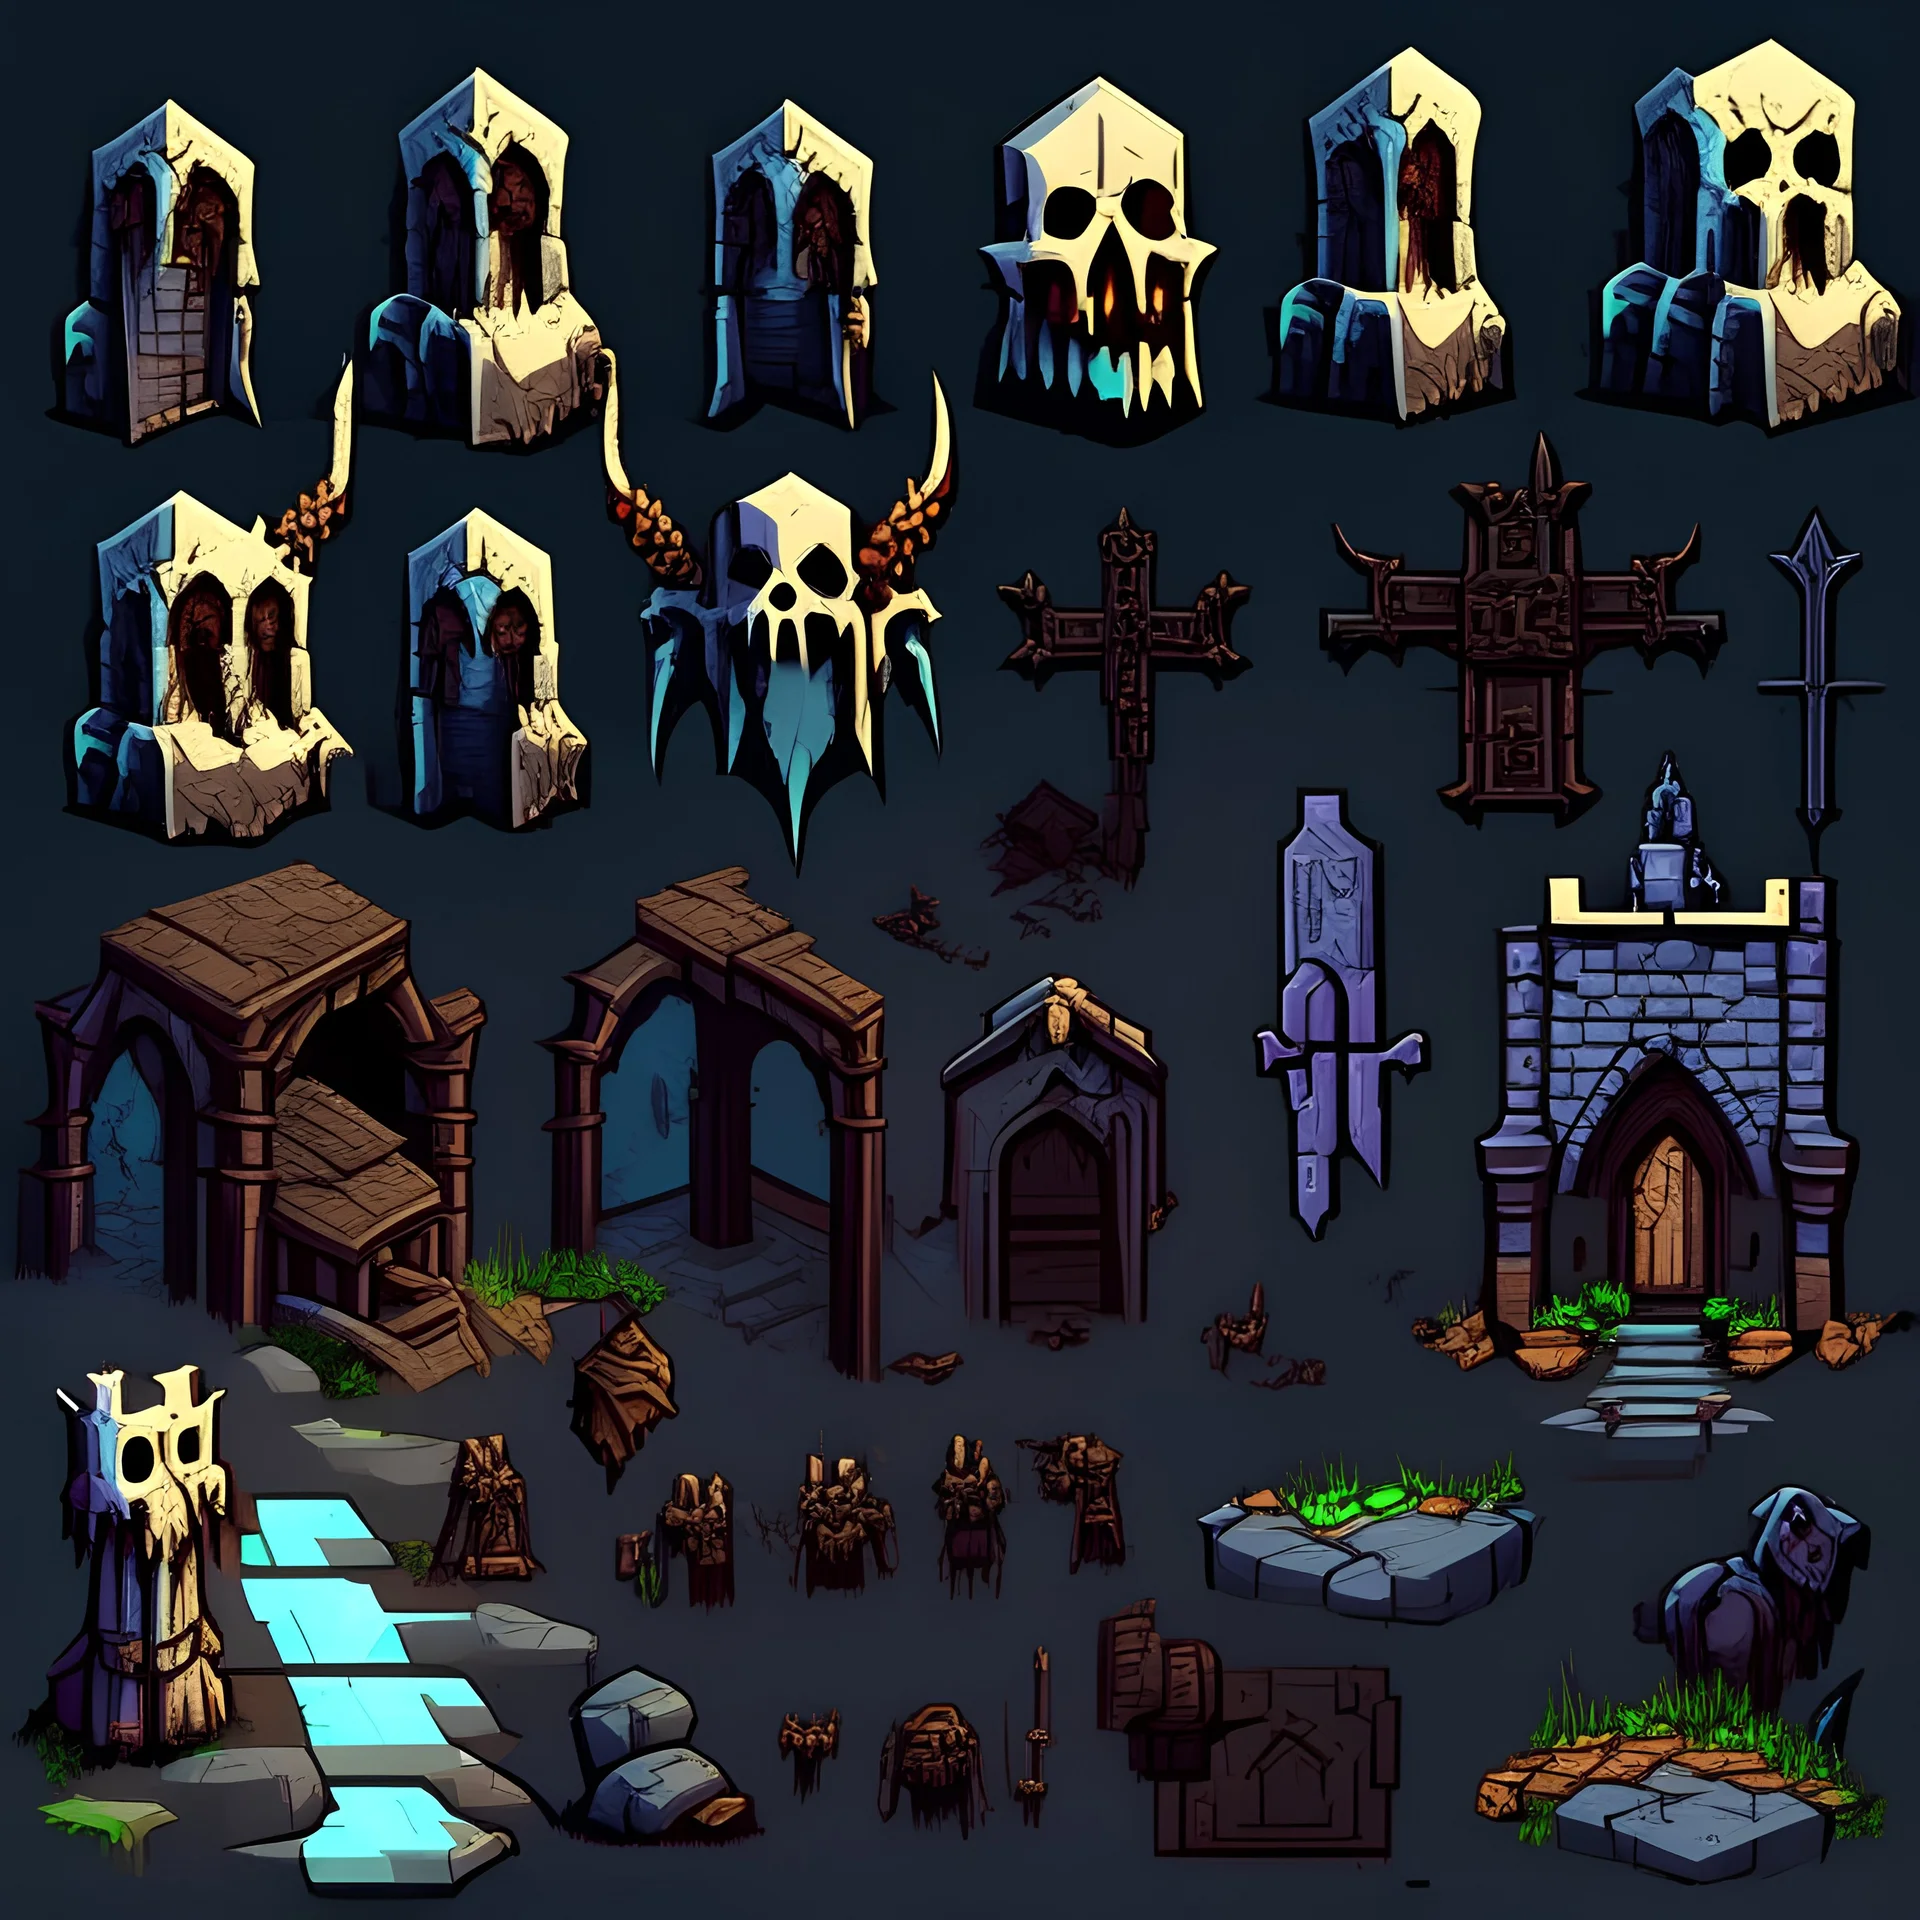 sprite sheet, 2D art, top down assets for a post-apocalyptic dungeon crawler, underground, churches, fighting demons